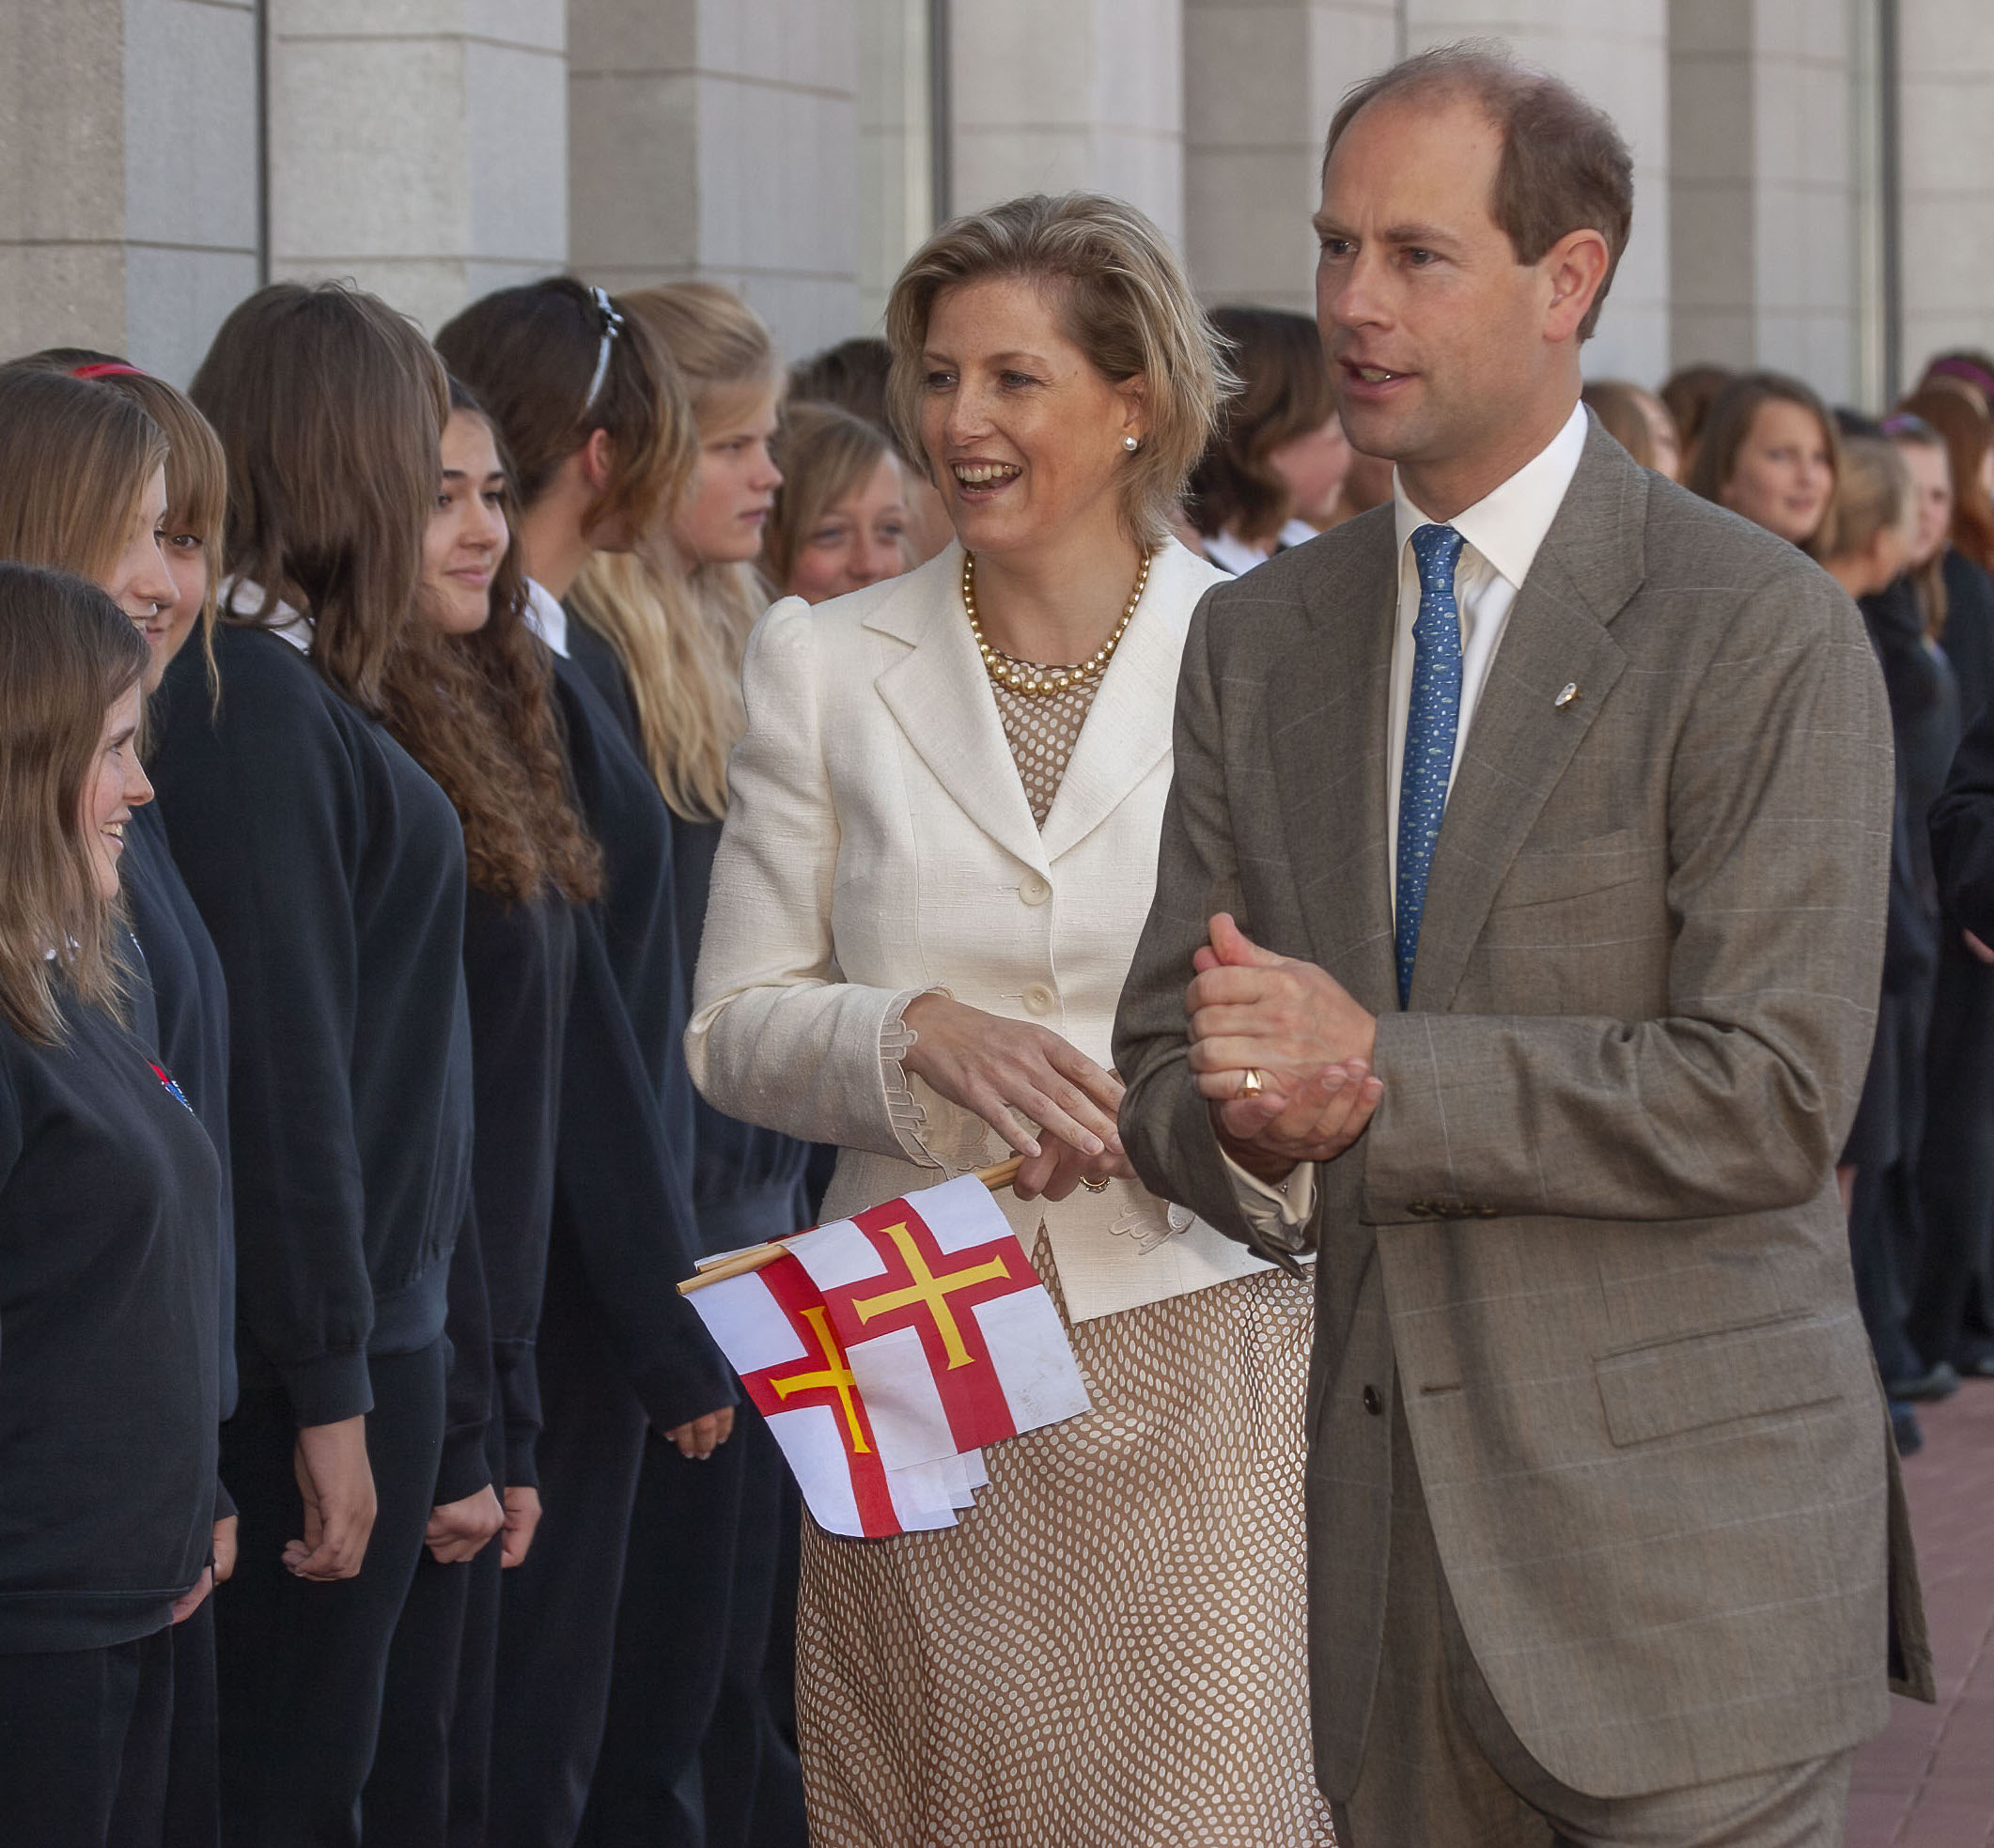 Their Royal Highnesses The Earl and Countess of Wessex pictured in July 2009 on a previous visit to Guernsey. Photo: Chris George Photography